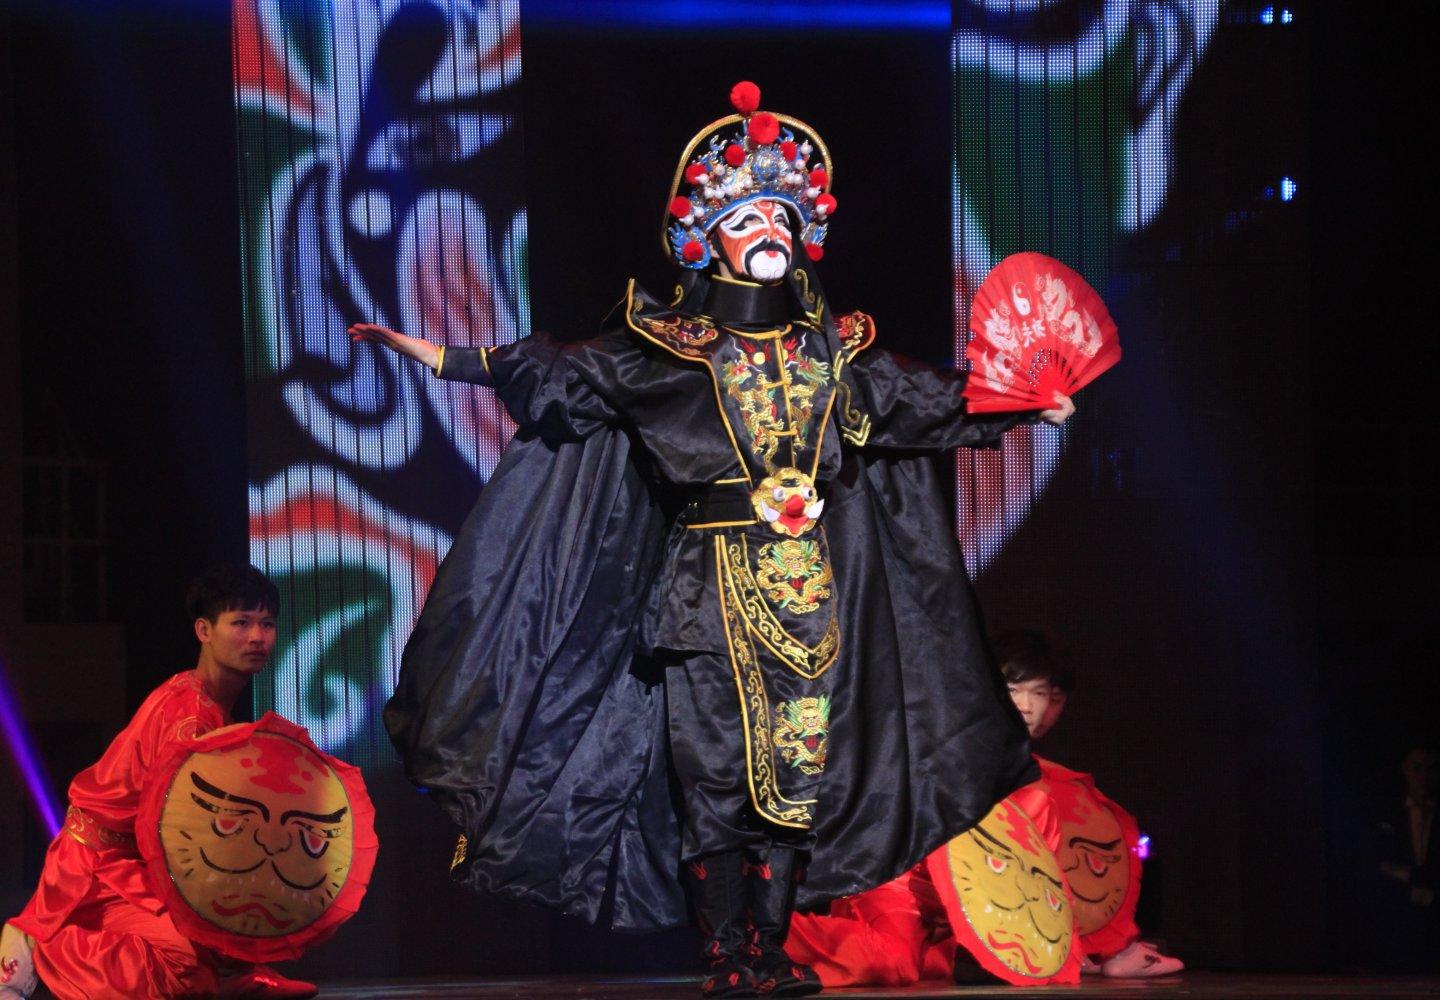 Three performers wear traditional asian attire on stage during theater performance